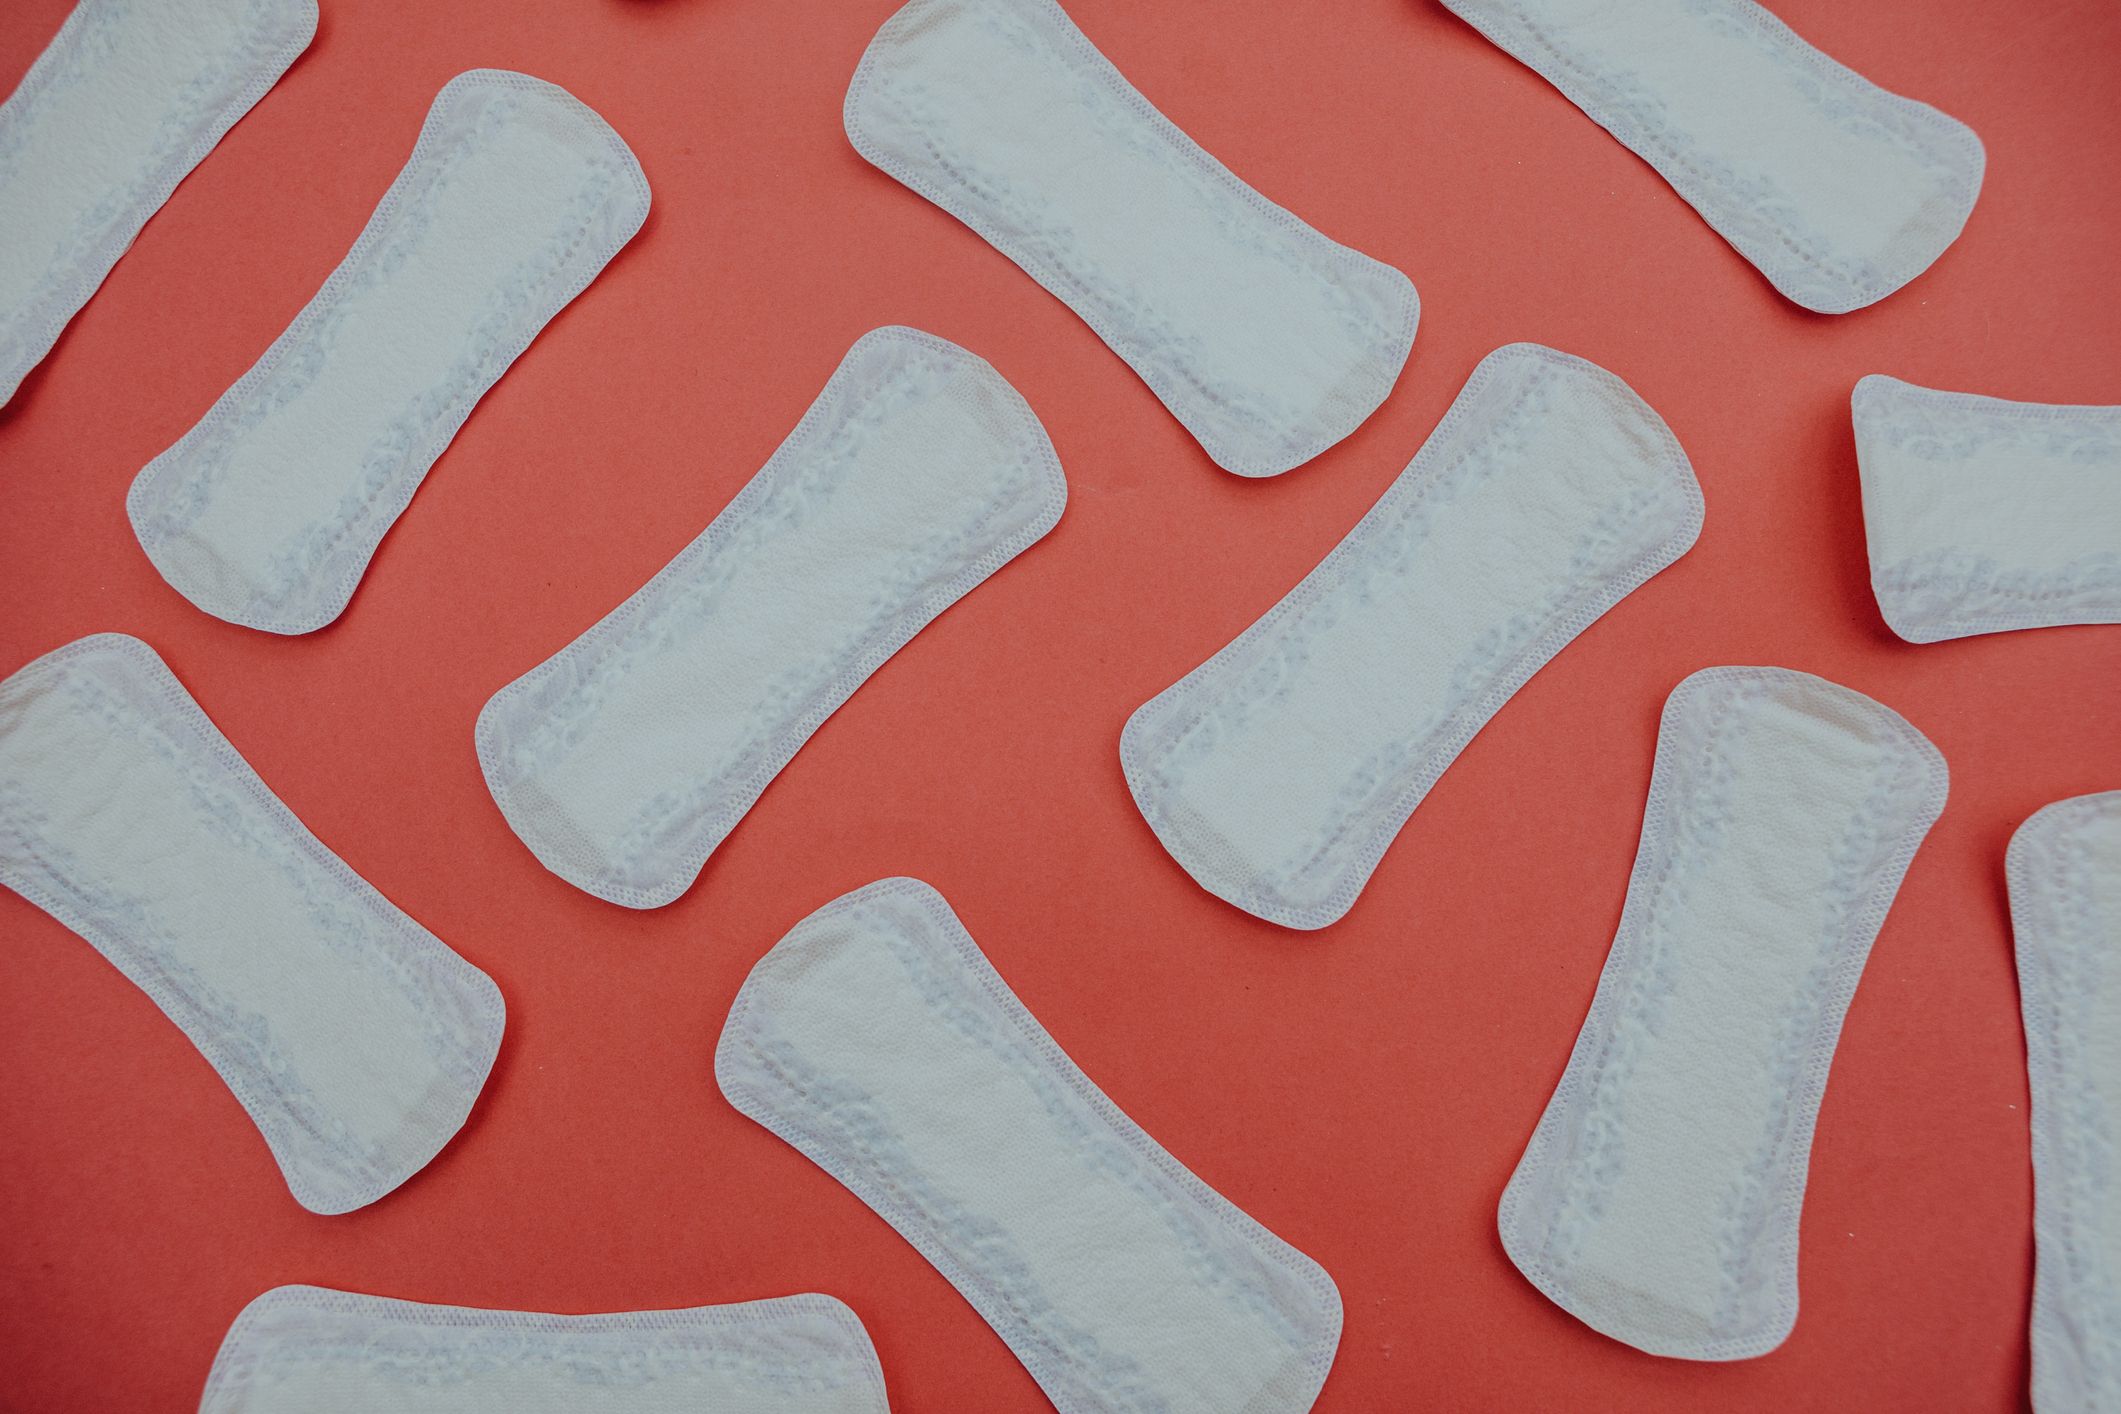 cotton pads for periods